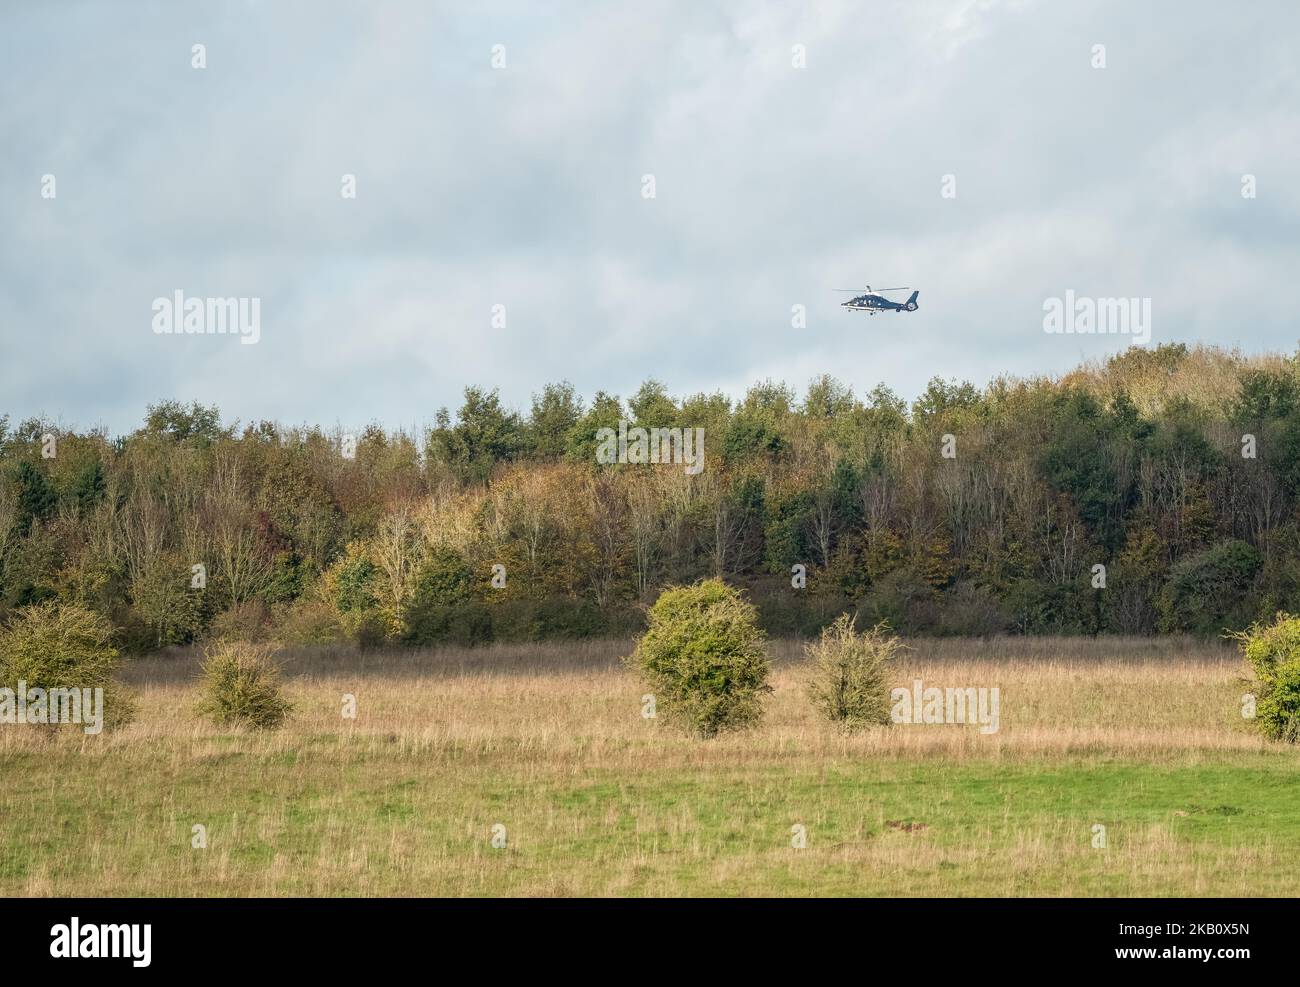 A British SAS Special Air Service Dauphin helicopter (658 squadron, Credenhill) flying low over woodland on a military training exercise, Wiltshire UK Stock Photo